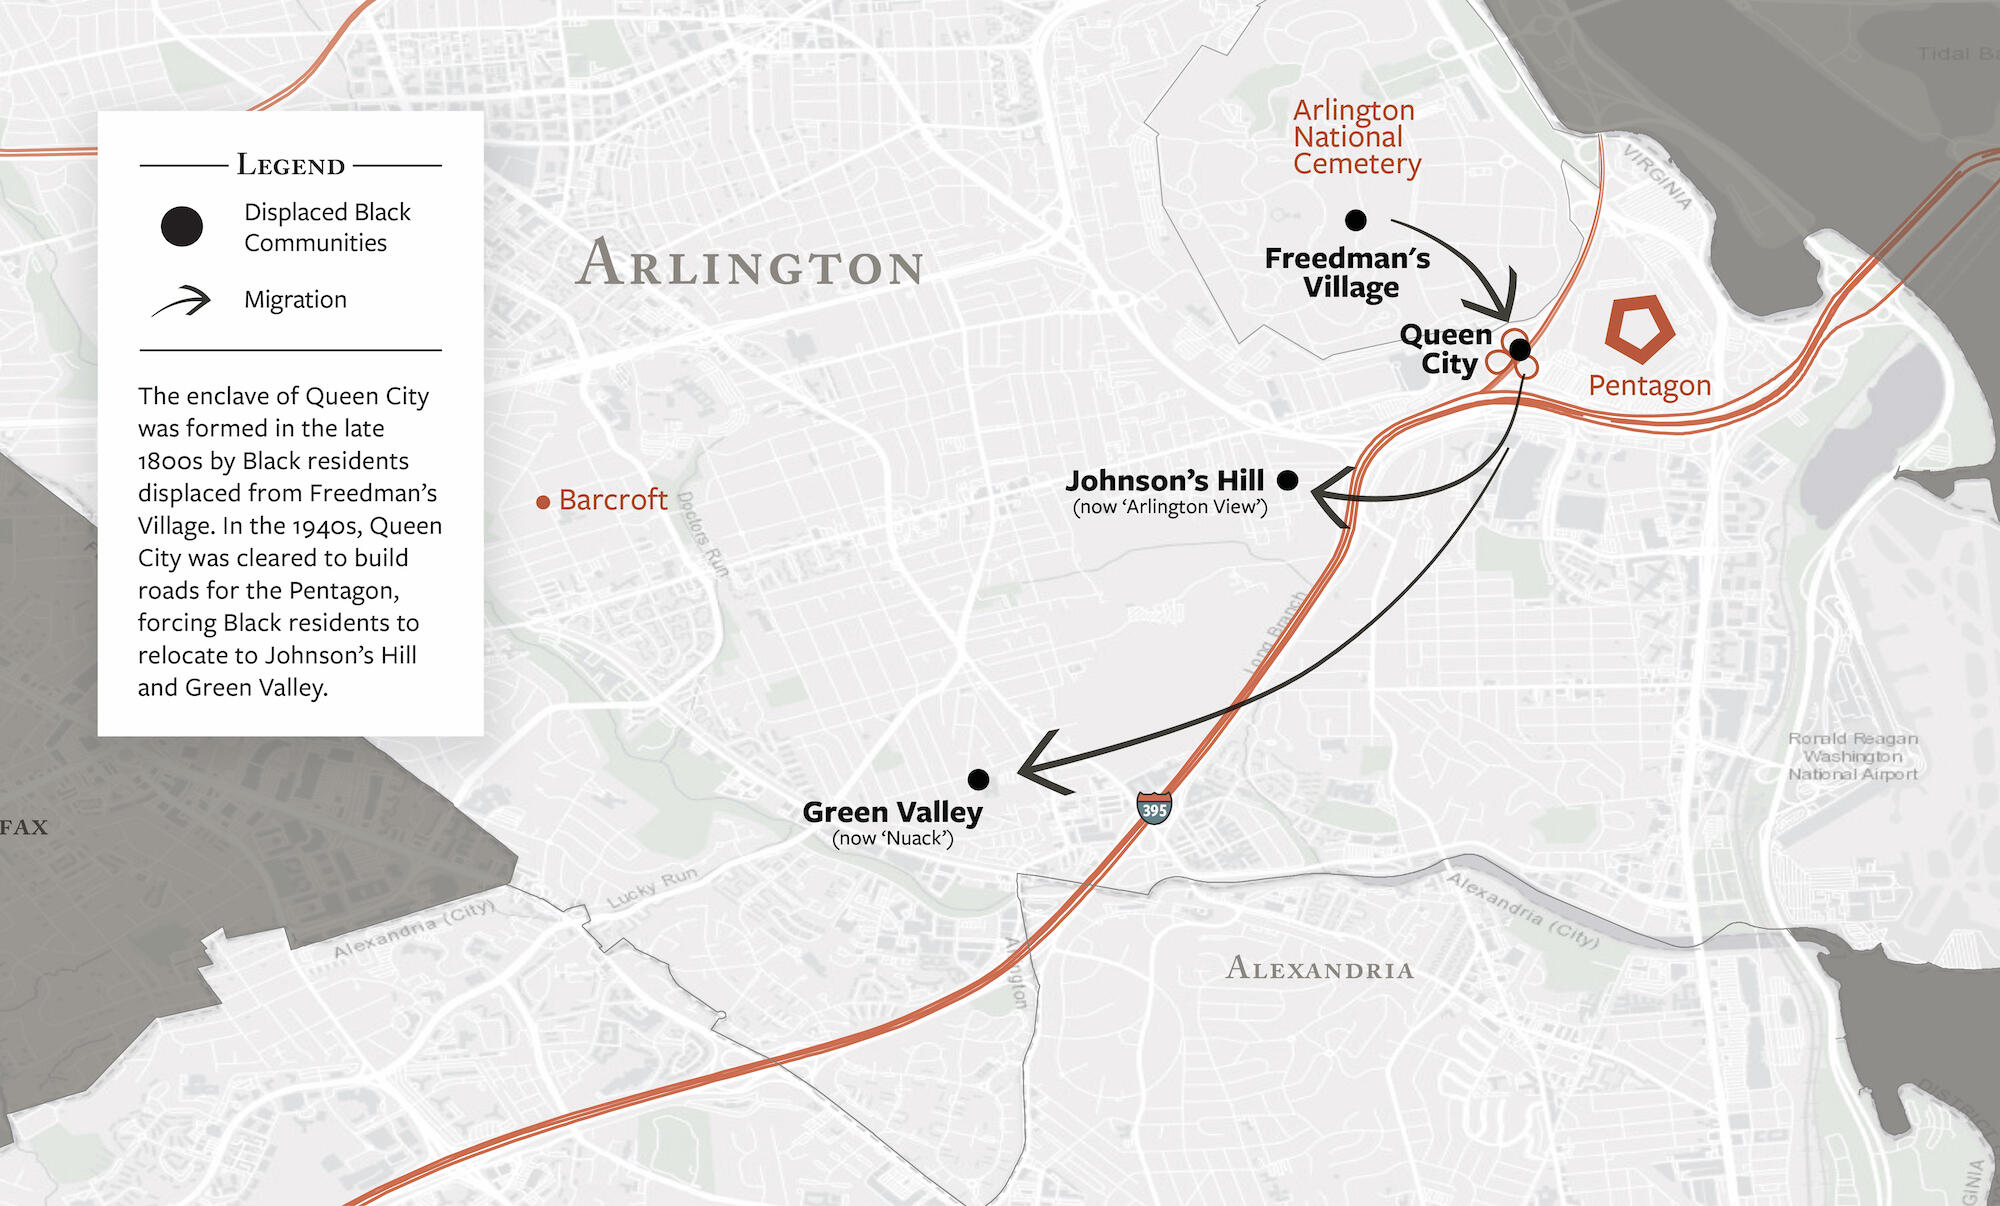 Map showing migration of Black Americans in Arlington Virginia. Queen City was formed in the late 1800s by Black residents displaced from Freedman's Village (now part of Arlington National Cemetery). In the 1940s, Queen City was razed to build roads for the Pentagon, forcing Black residents to relocate to Johnson's Hill and Green Valley. 